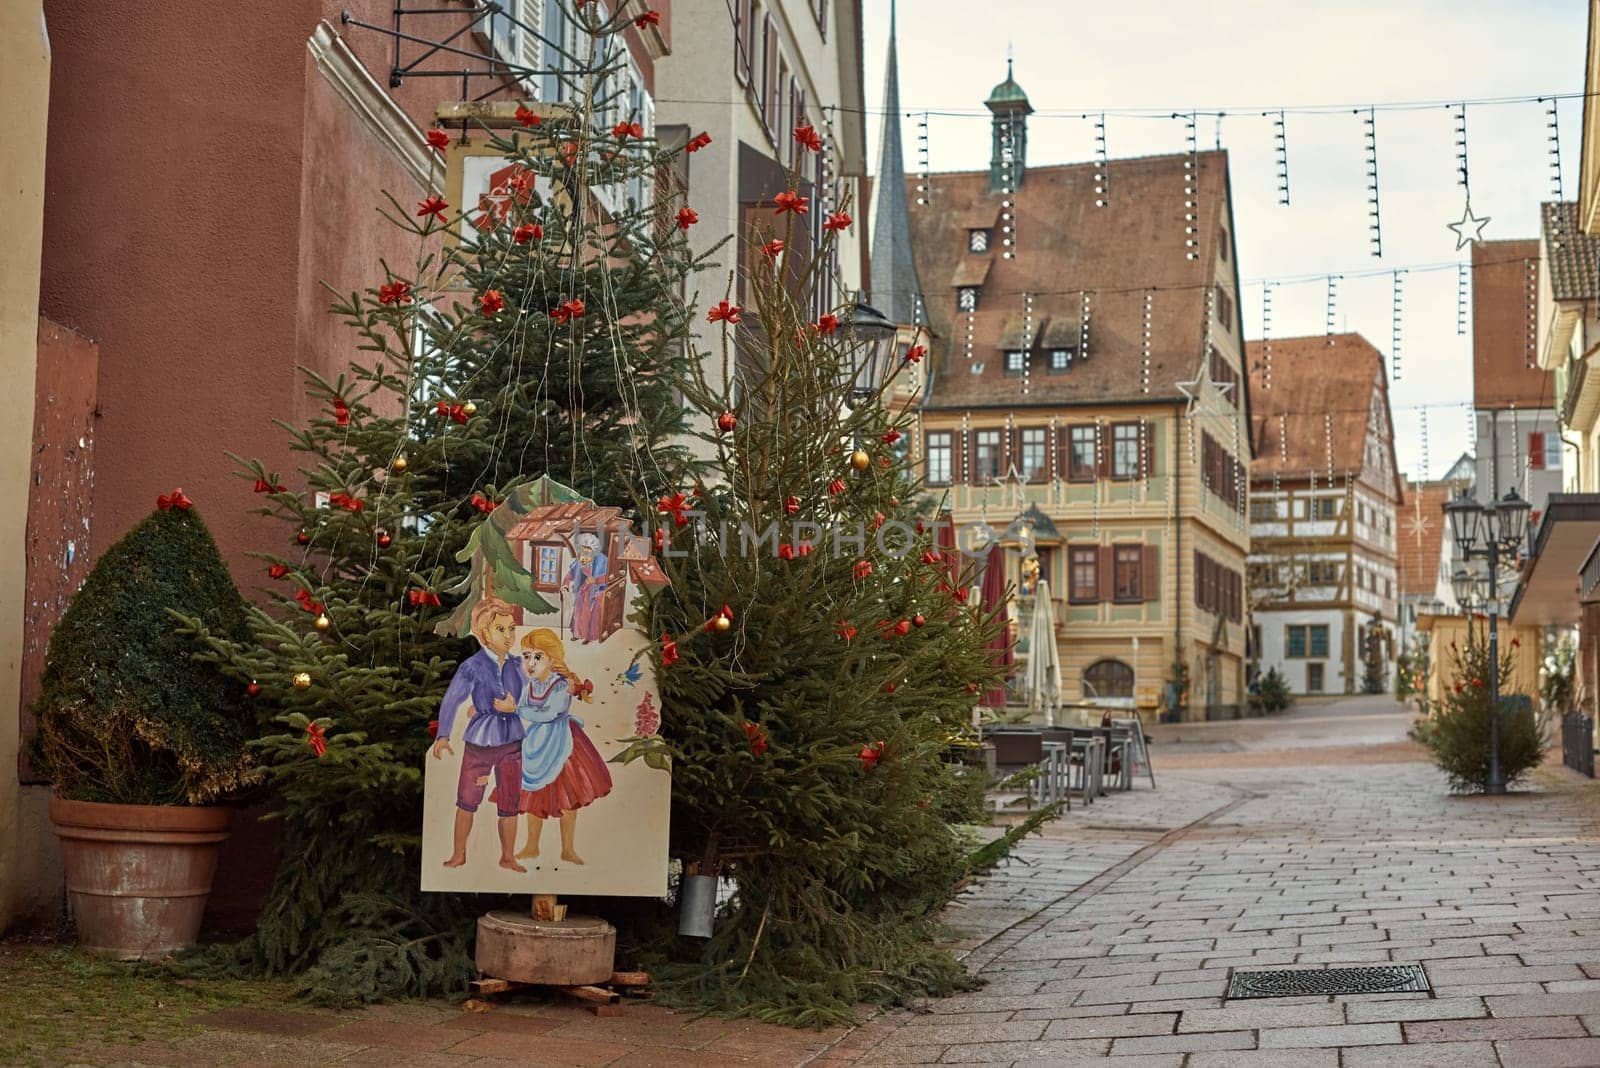 Winter Festivities in Bitigheim-Bissingen: Charming Half-Timbered Houses Adorned with Christmas Decorations. New Year's atmosphere of Bitigheim-Bissingen, Baden-Württemberg, Germany by Andrii_Ko